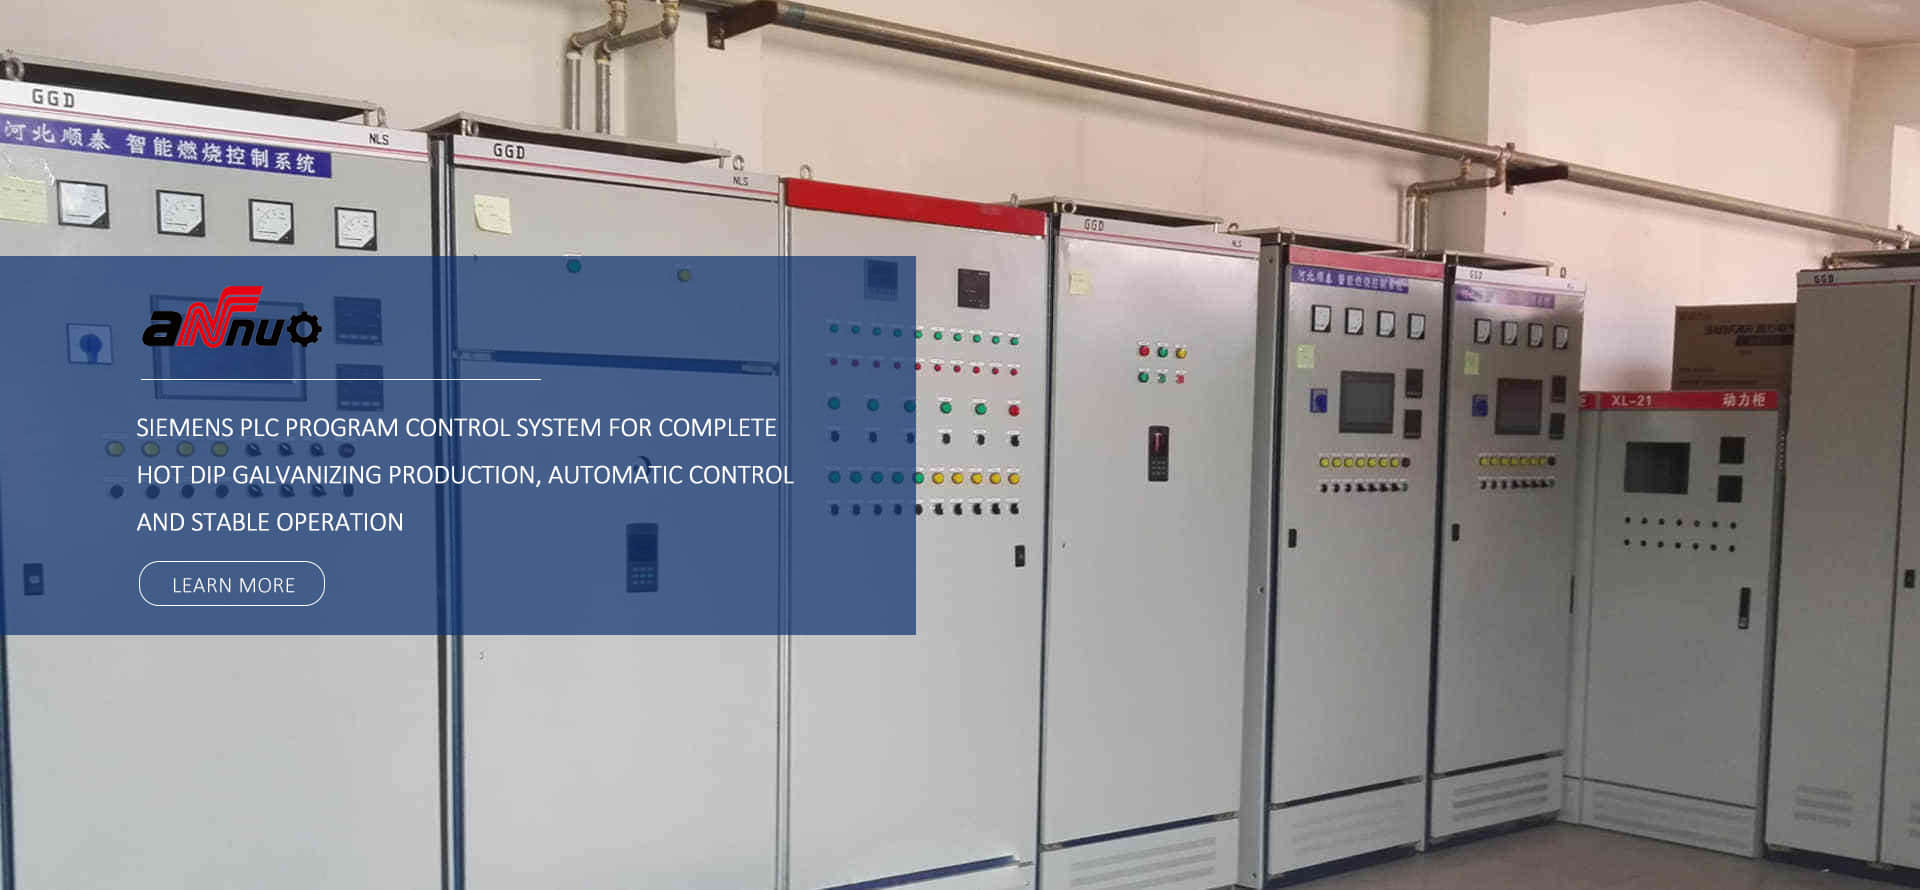 Siemens PLC Program Control system for complete hot dip galvanizing Production, automatic control and stable operation